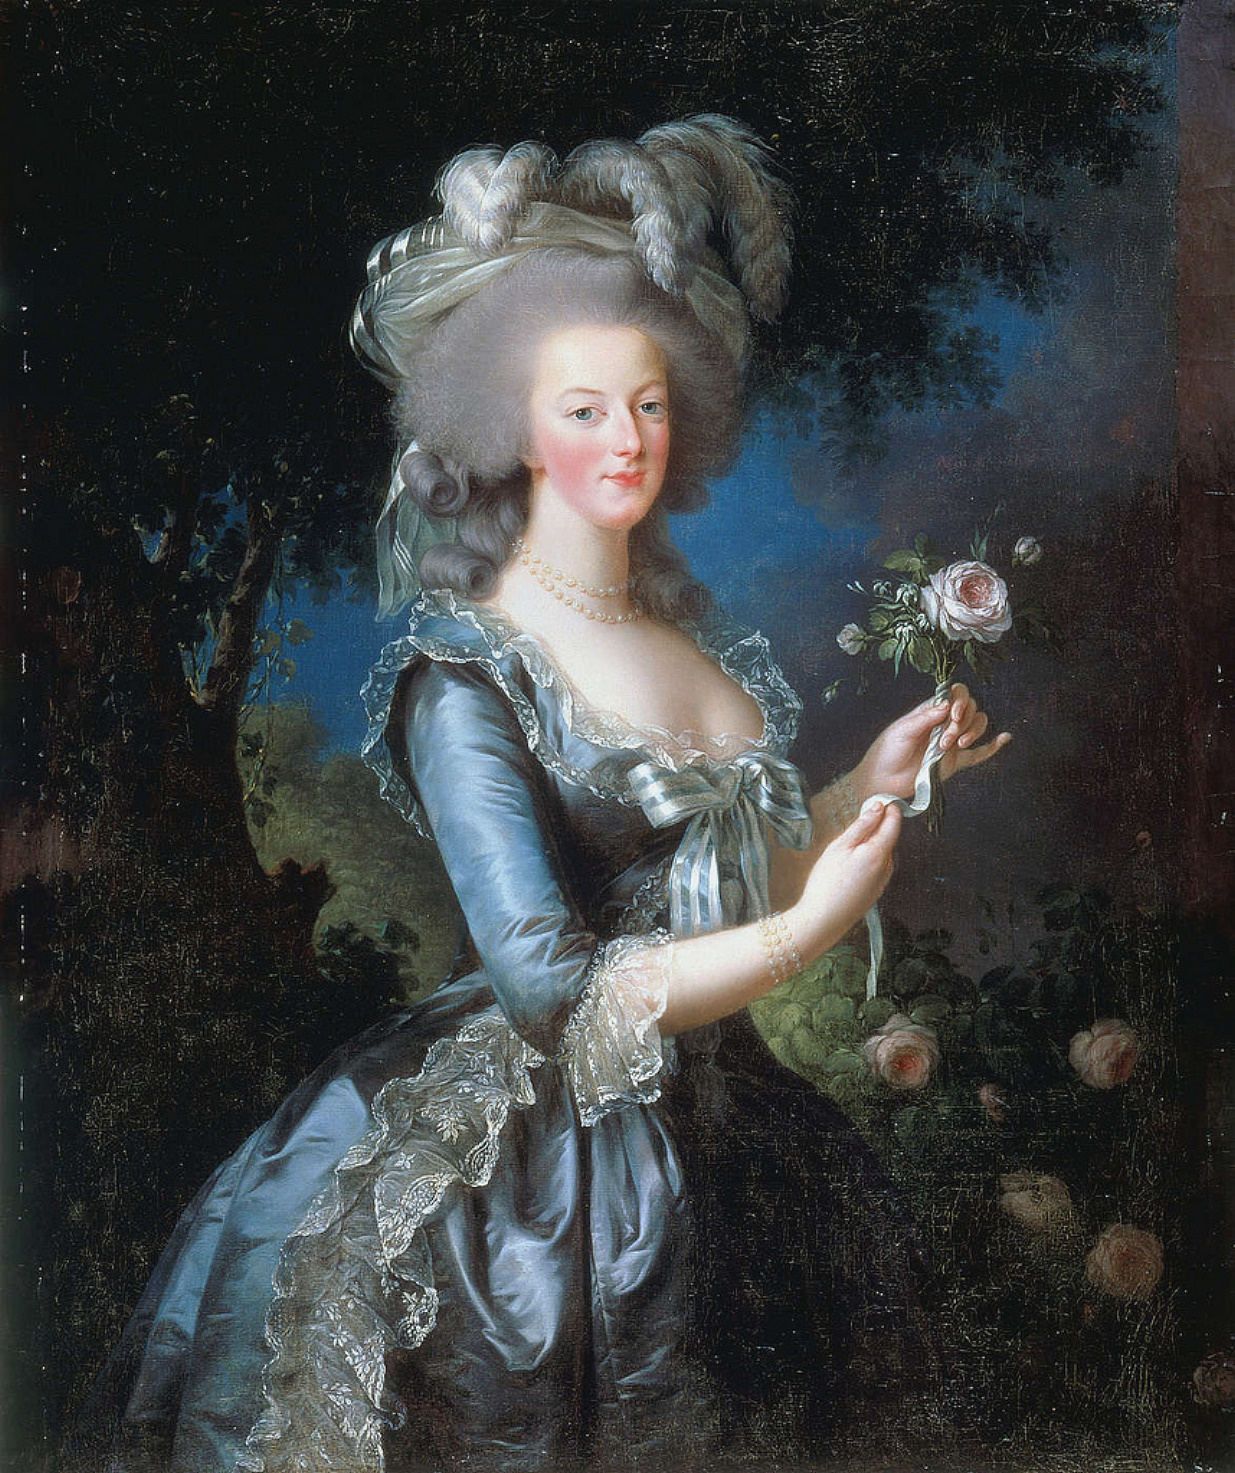 Marie Antoinete, wearing an elaborate teal gown and headdress, holding a rose.